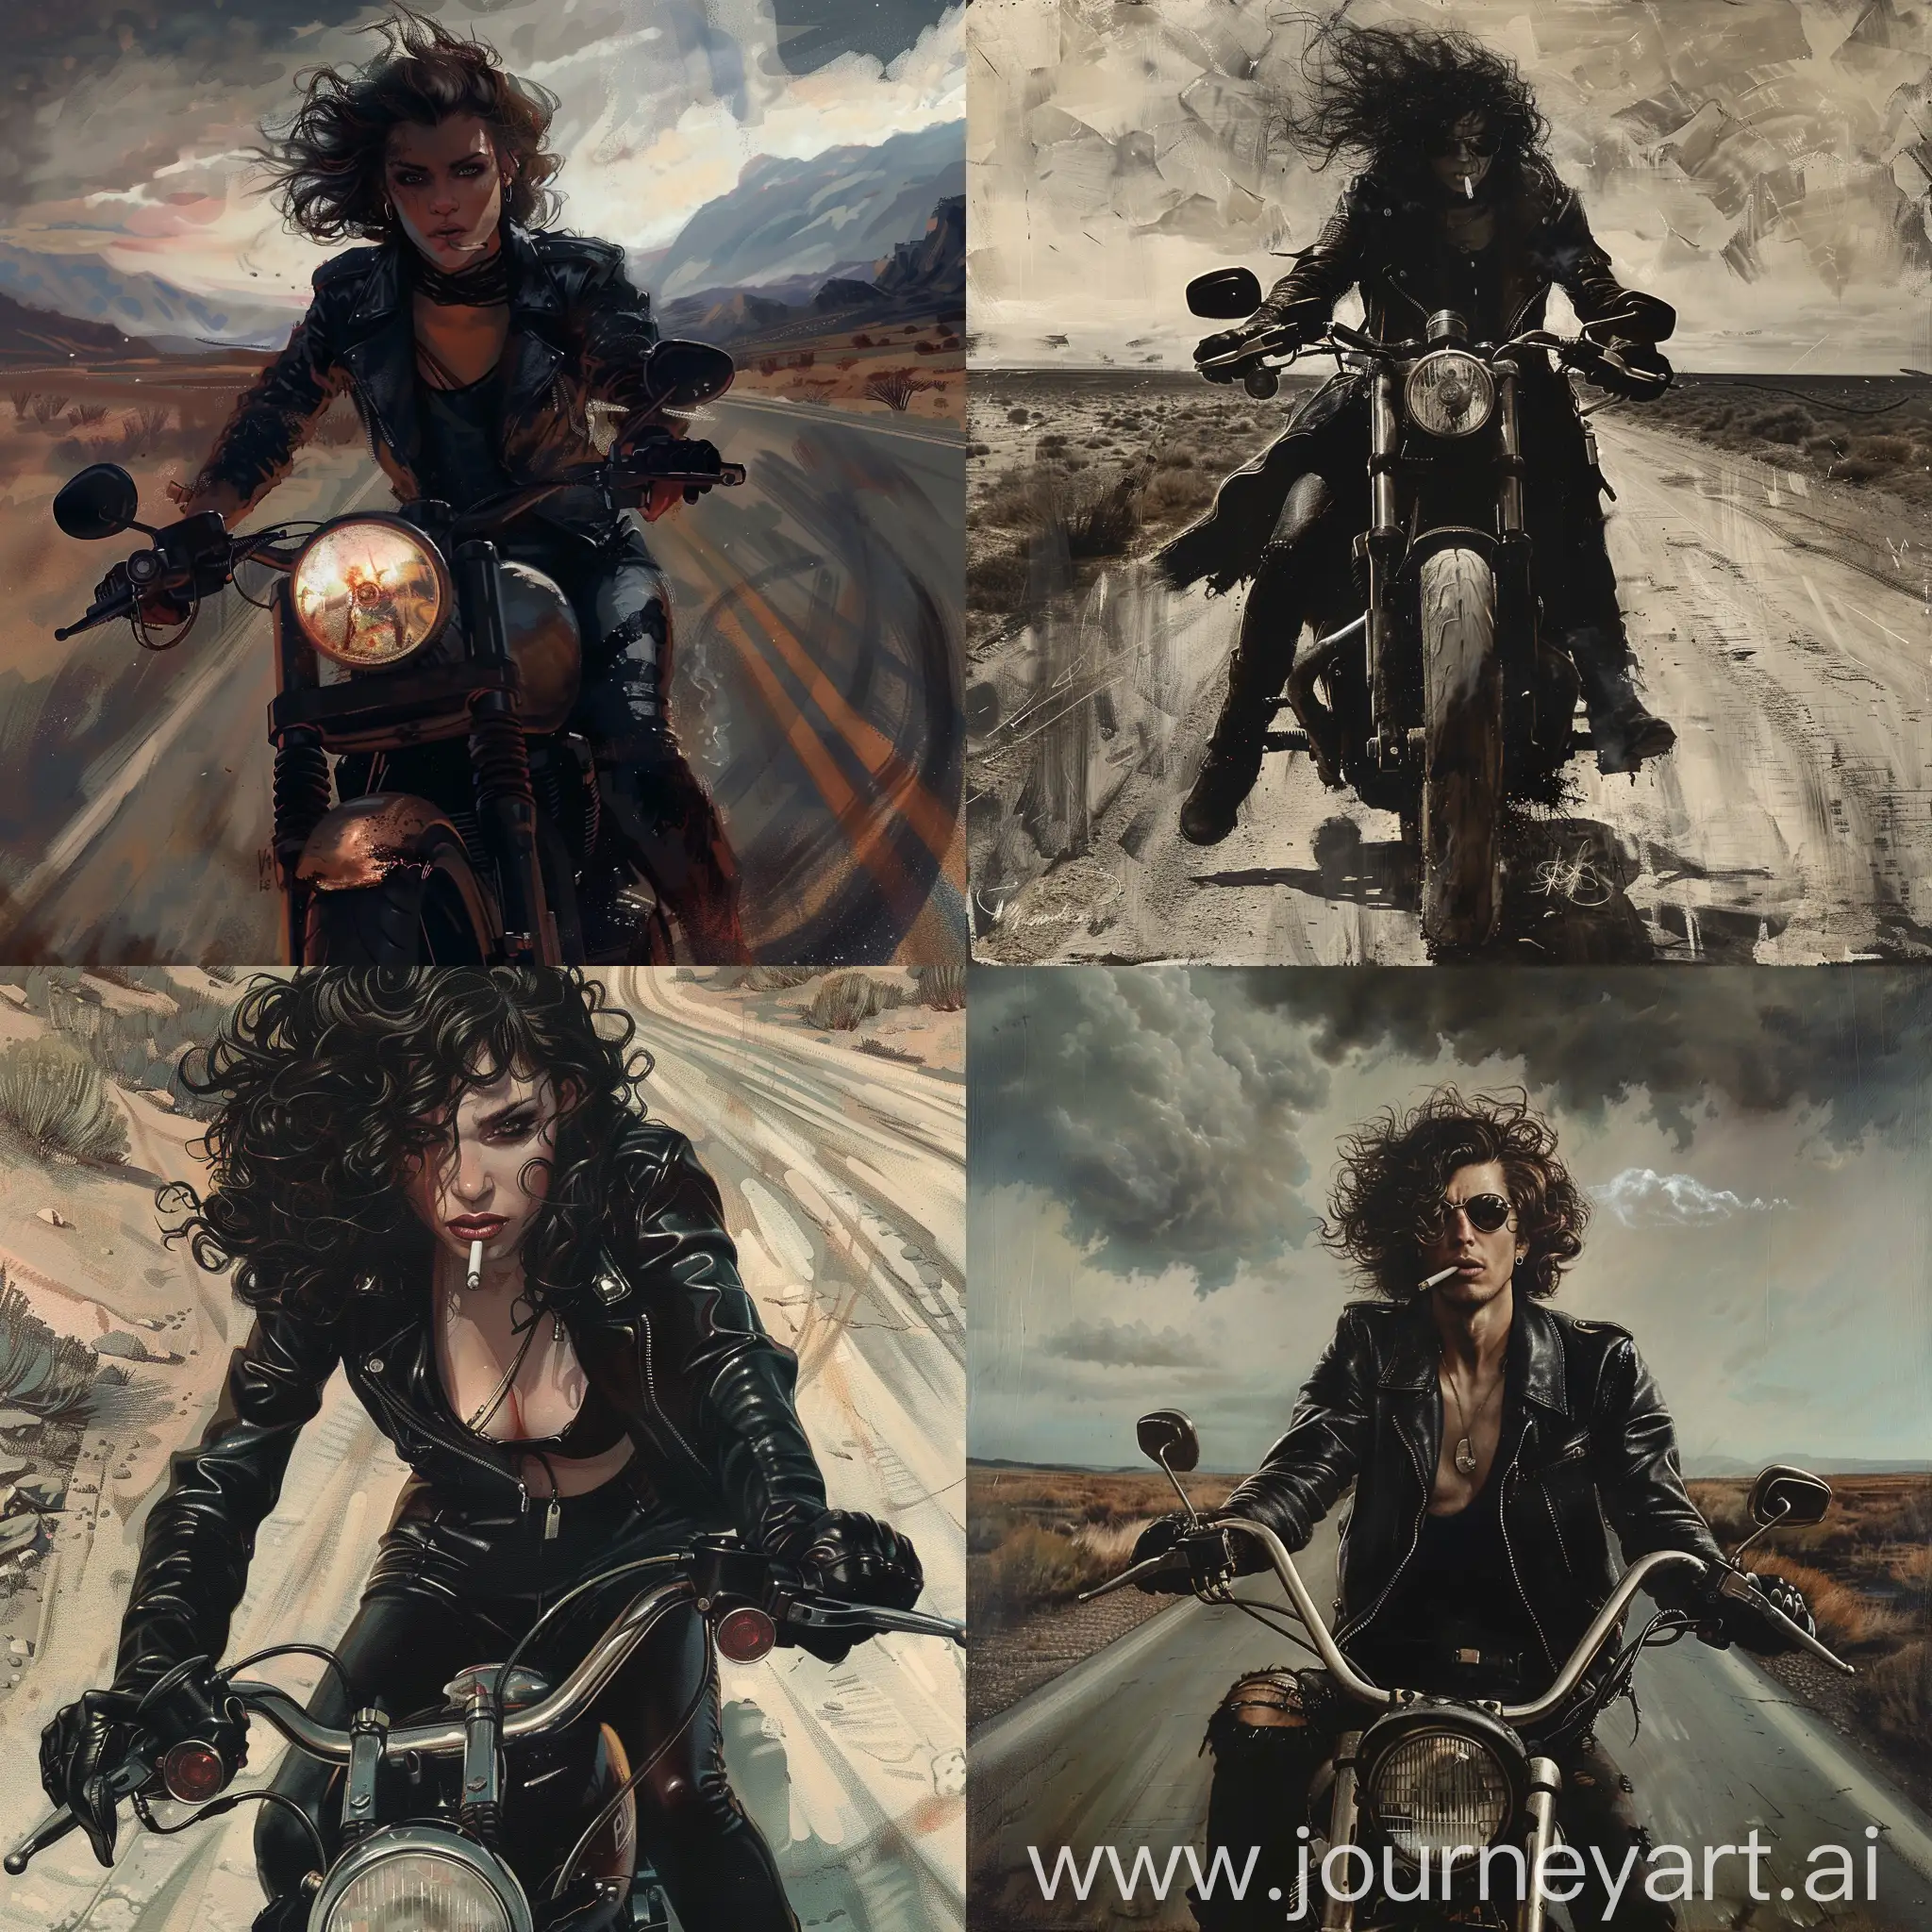 Motorcyclist-Riding-Through-Deserted-Road-Angular-Face-and-Curly-Hair